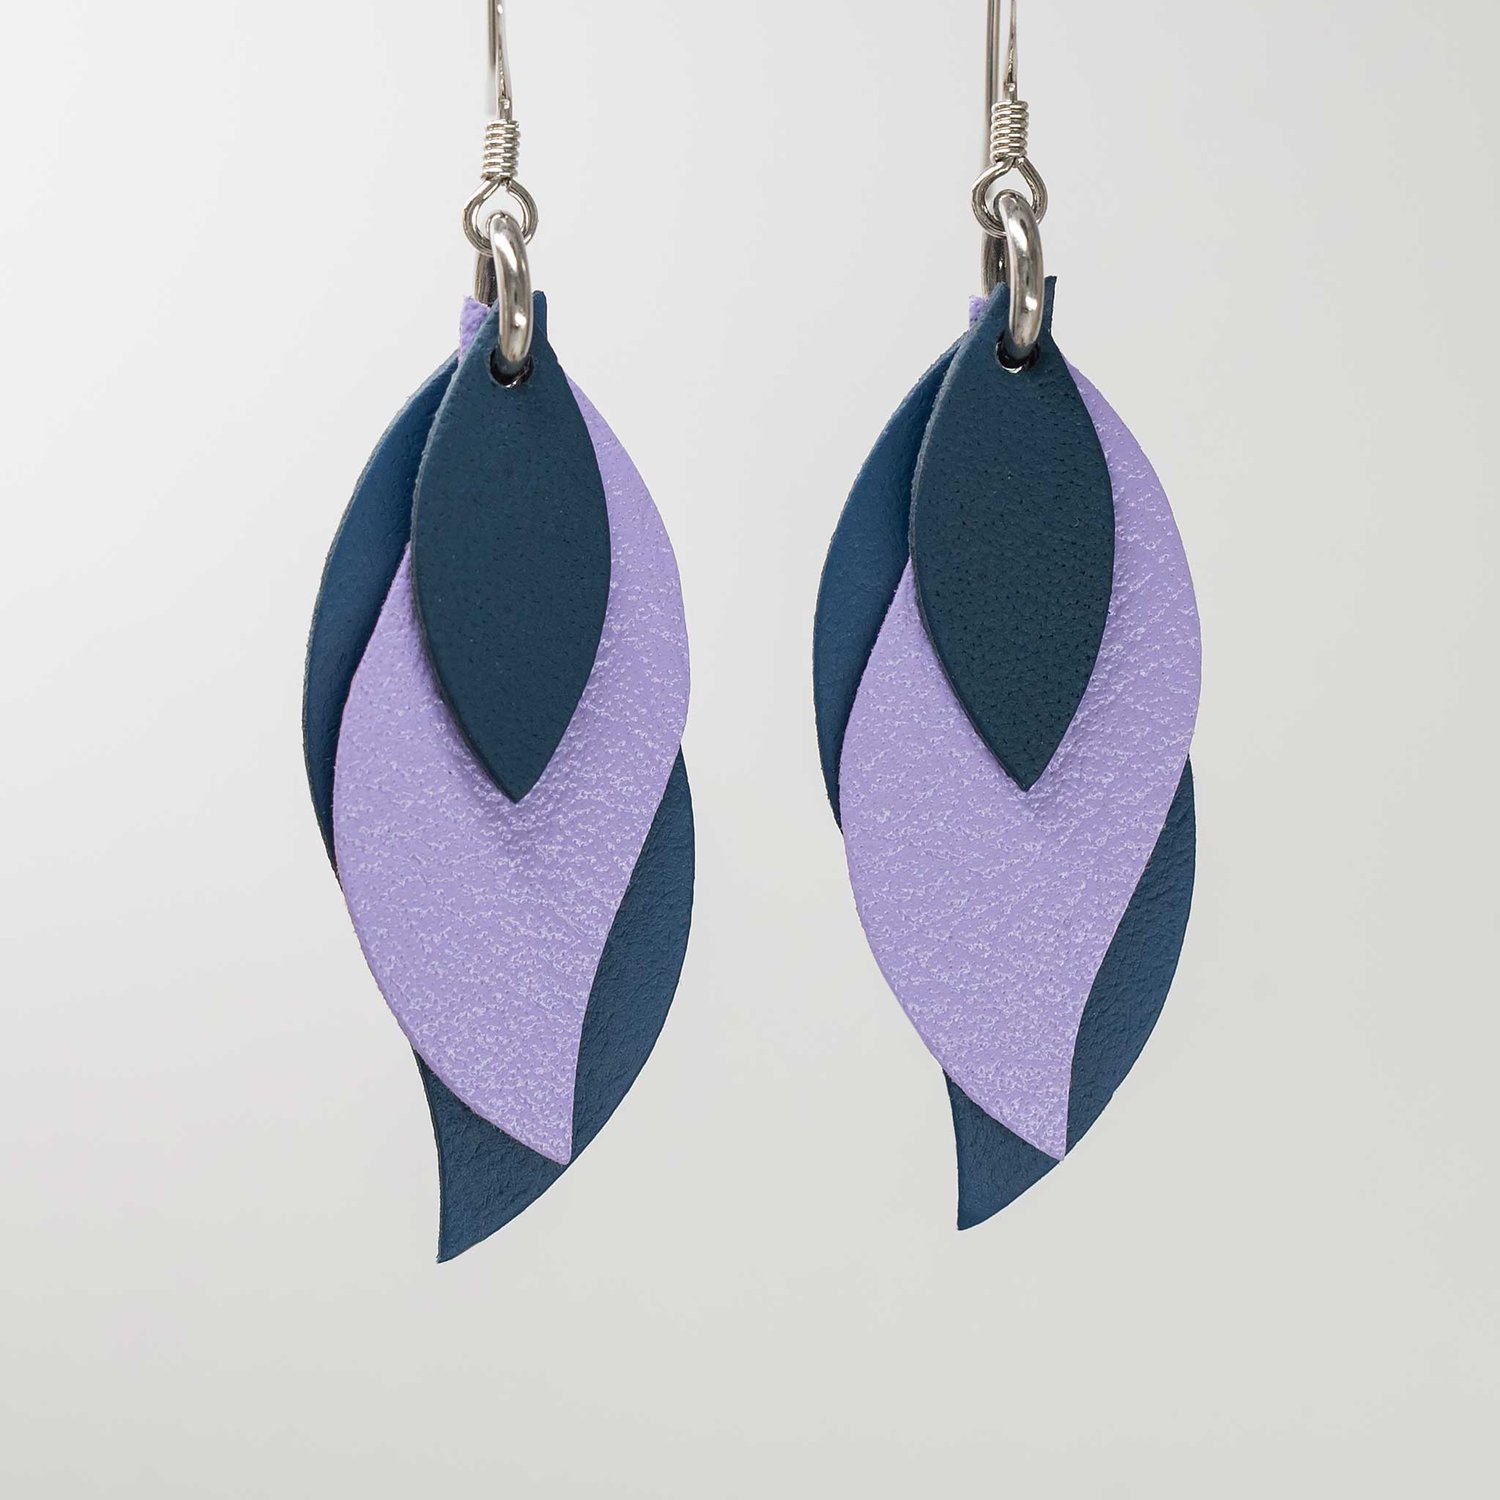 Image of Handmade Australian leather leaf earrings - Blues and lilac [LBP-056]